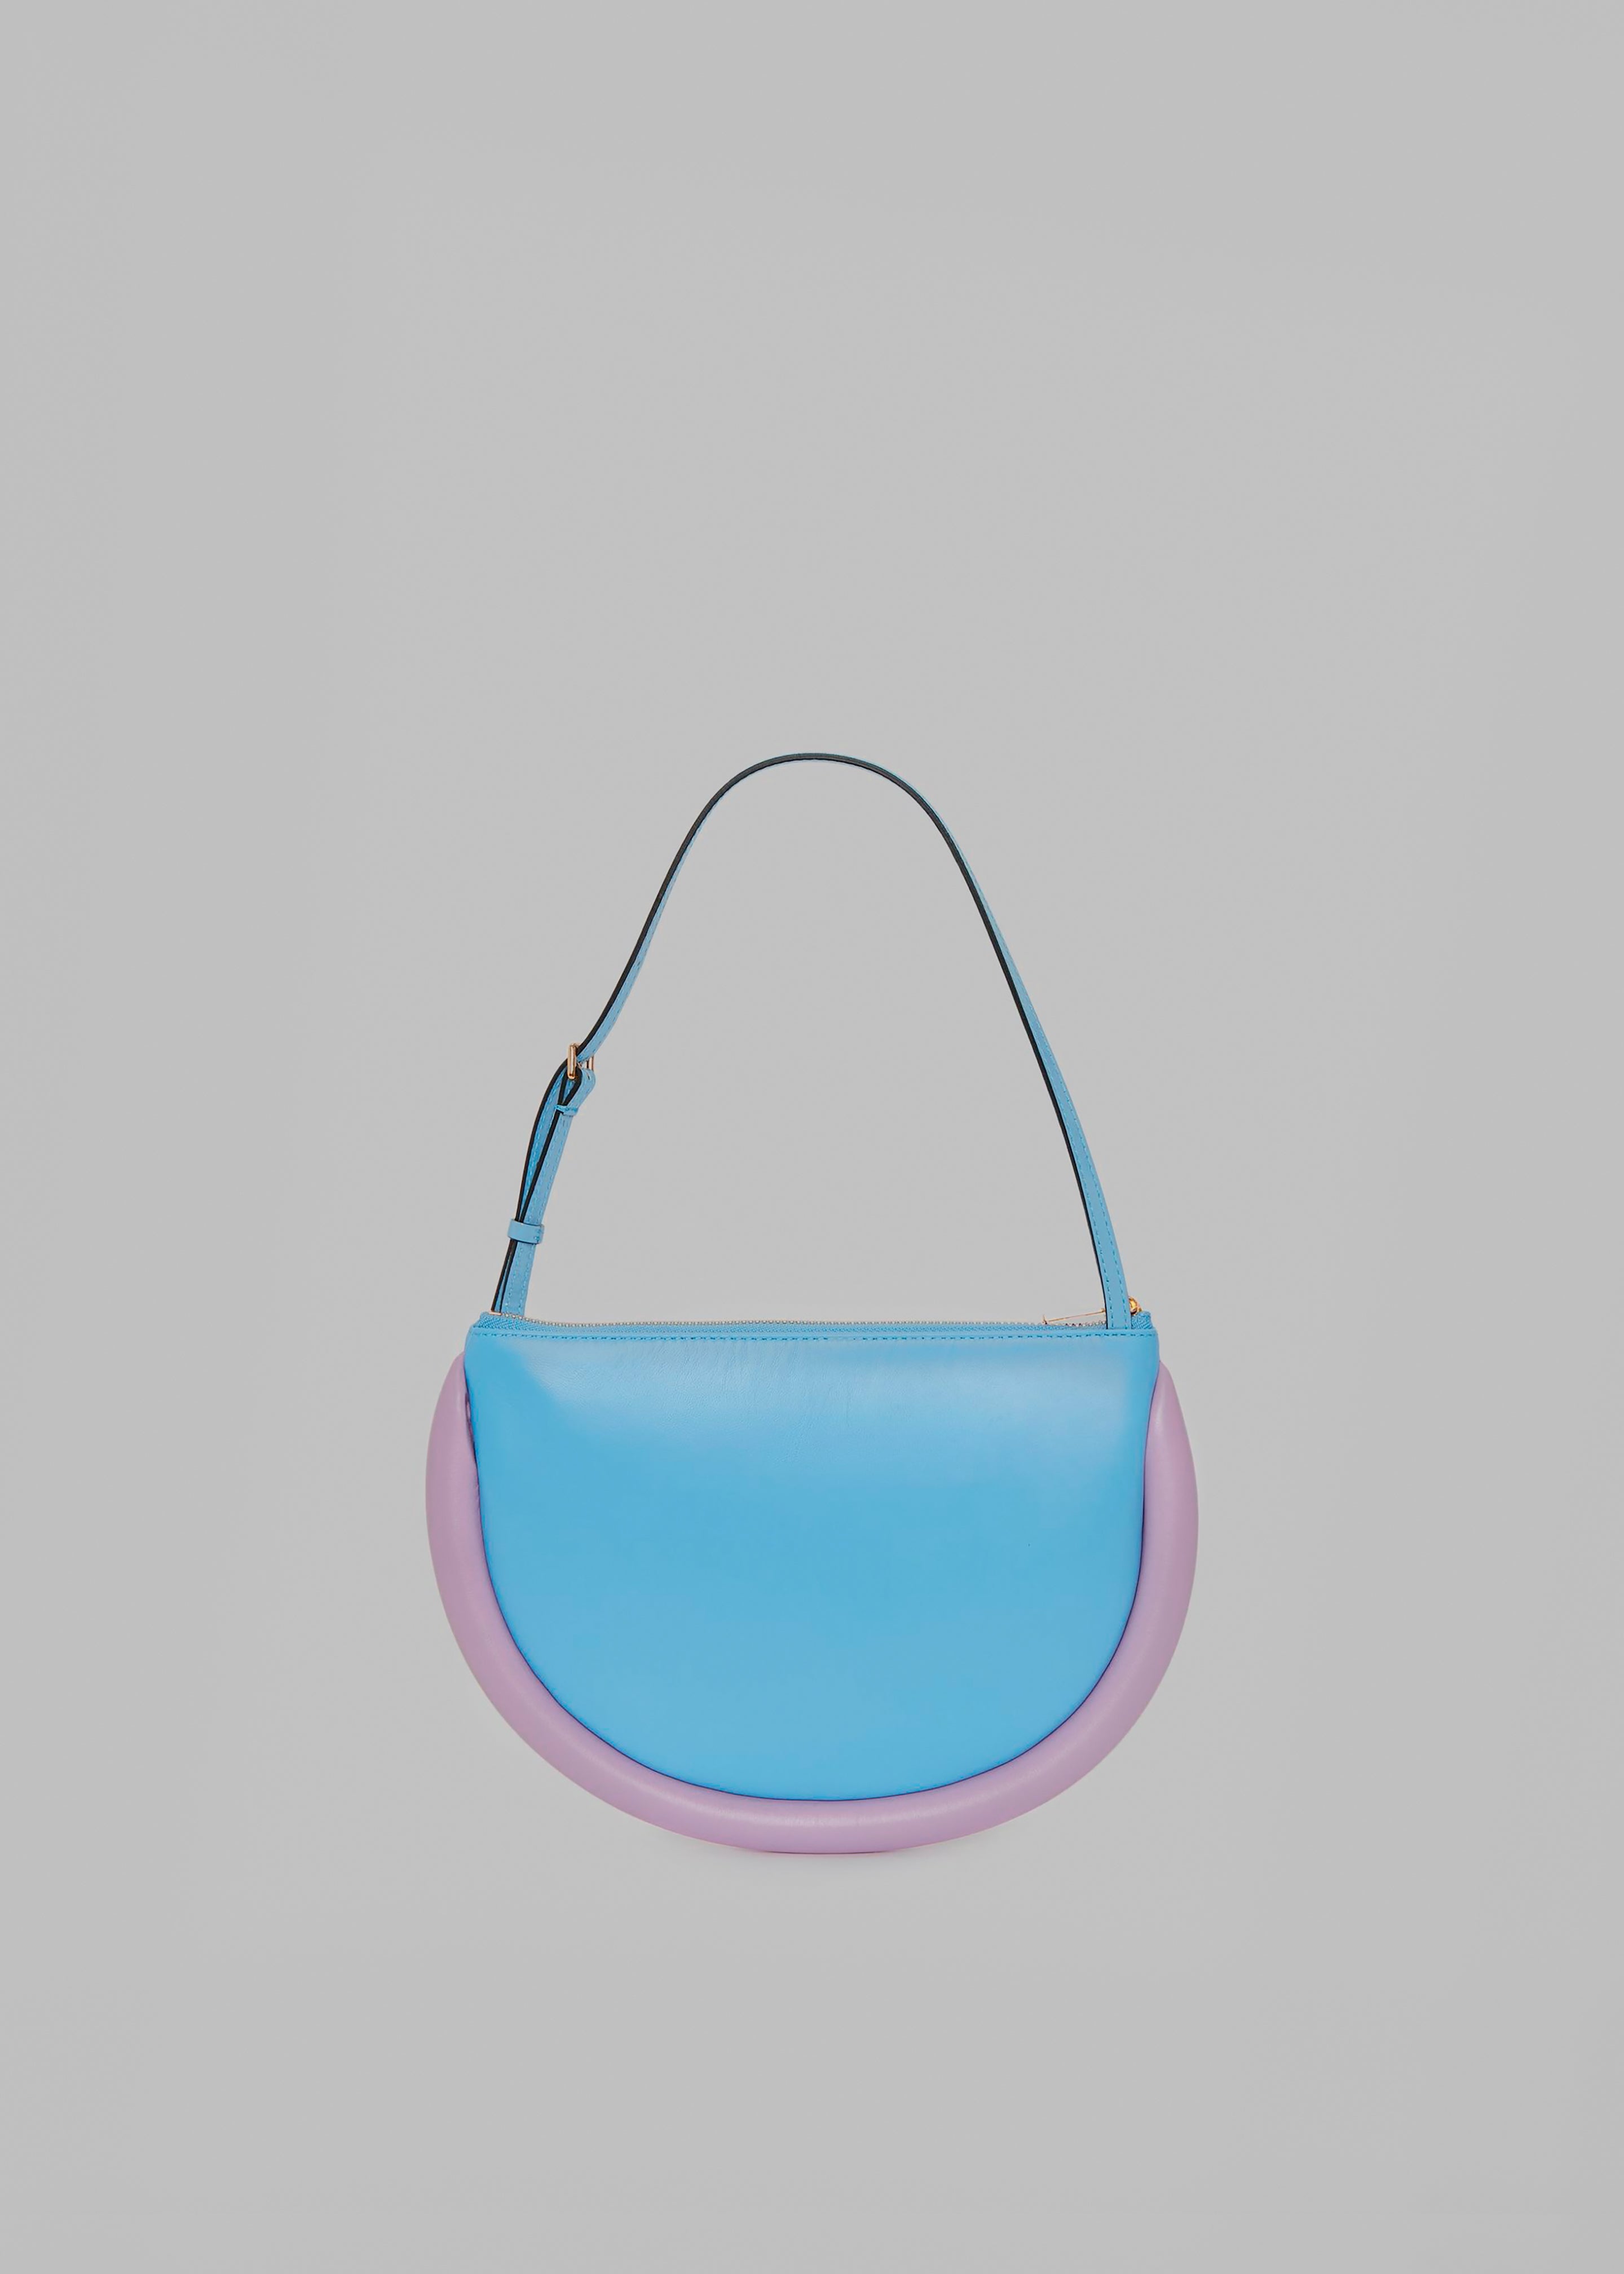 JW Anderson The Bumper Moon - Blue/Lilac - 4